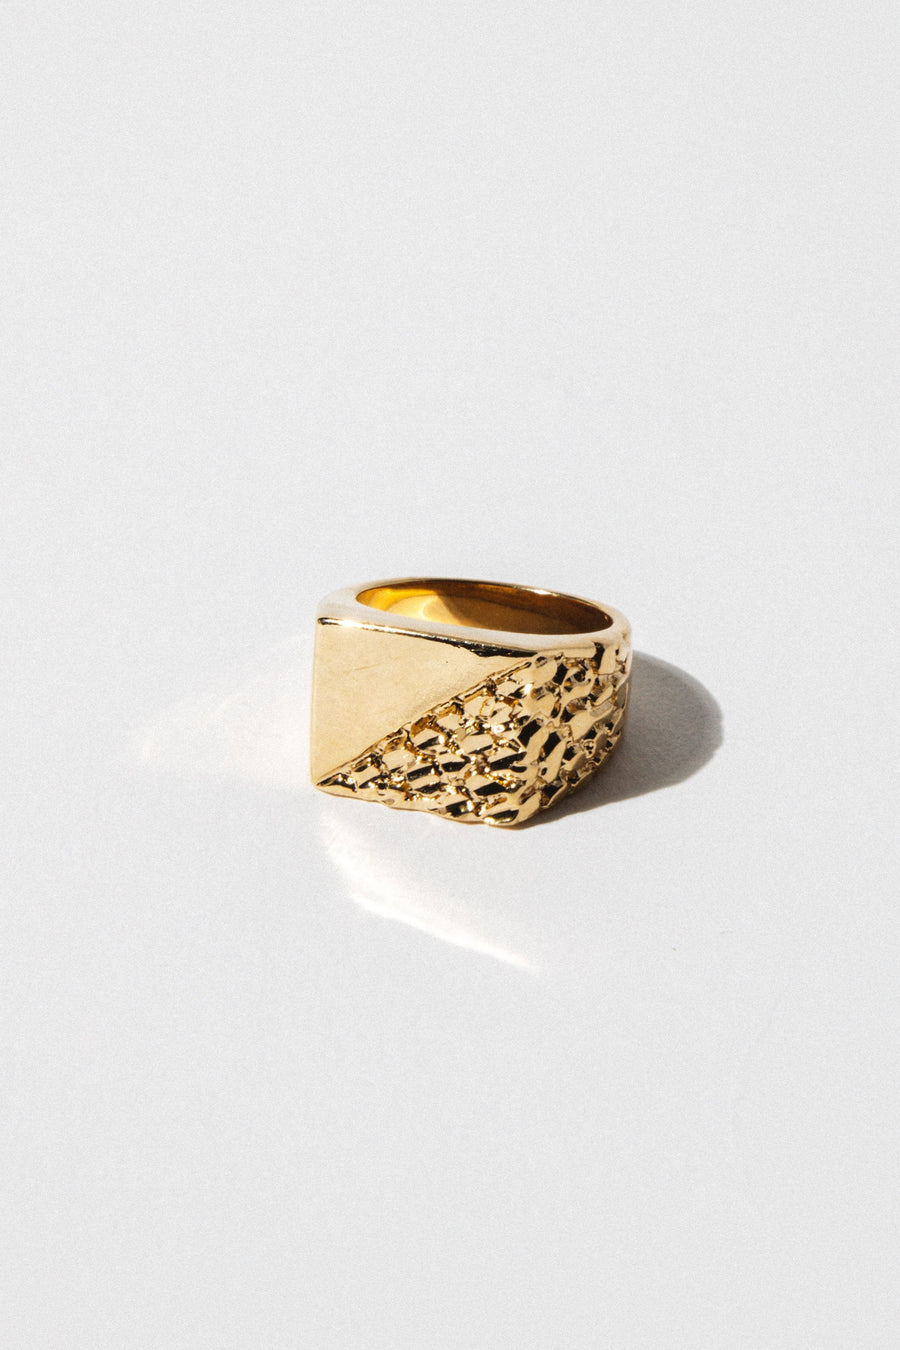 Sparrow Jewelry The Catacomb Ring